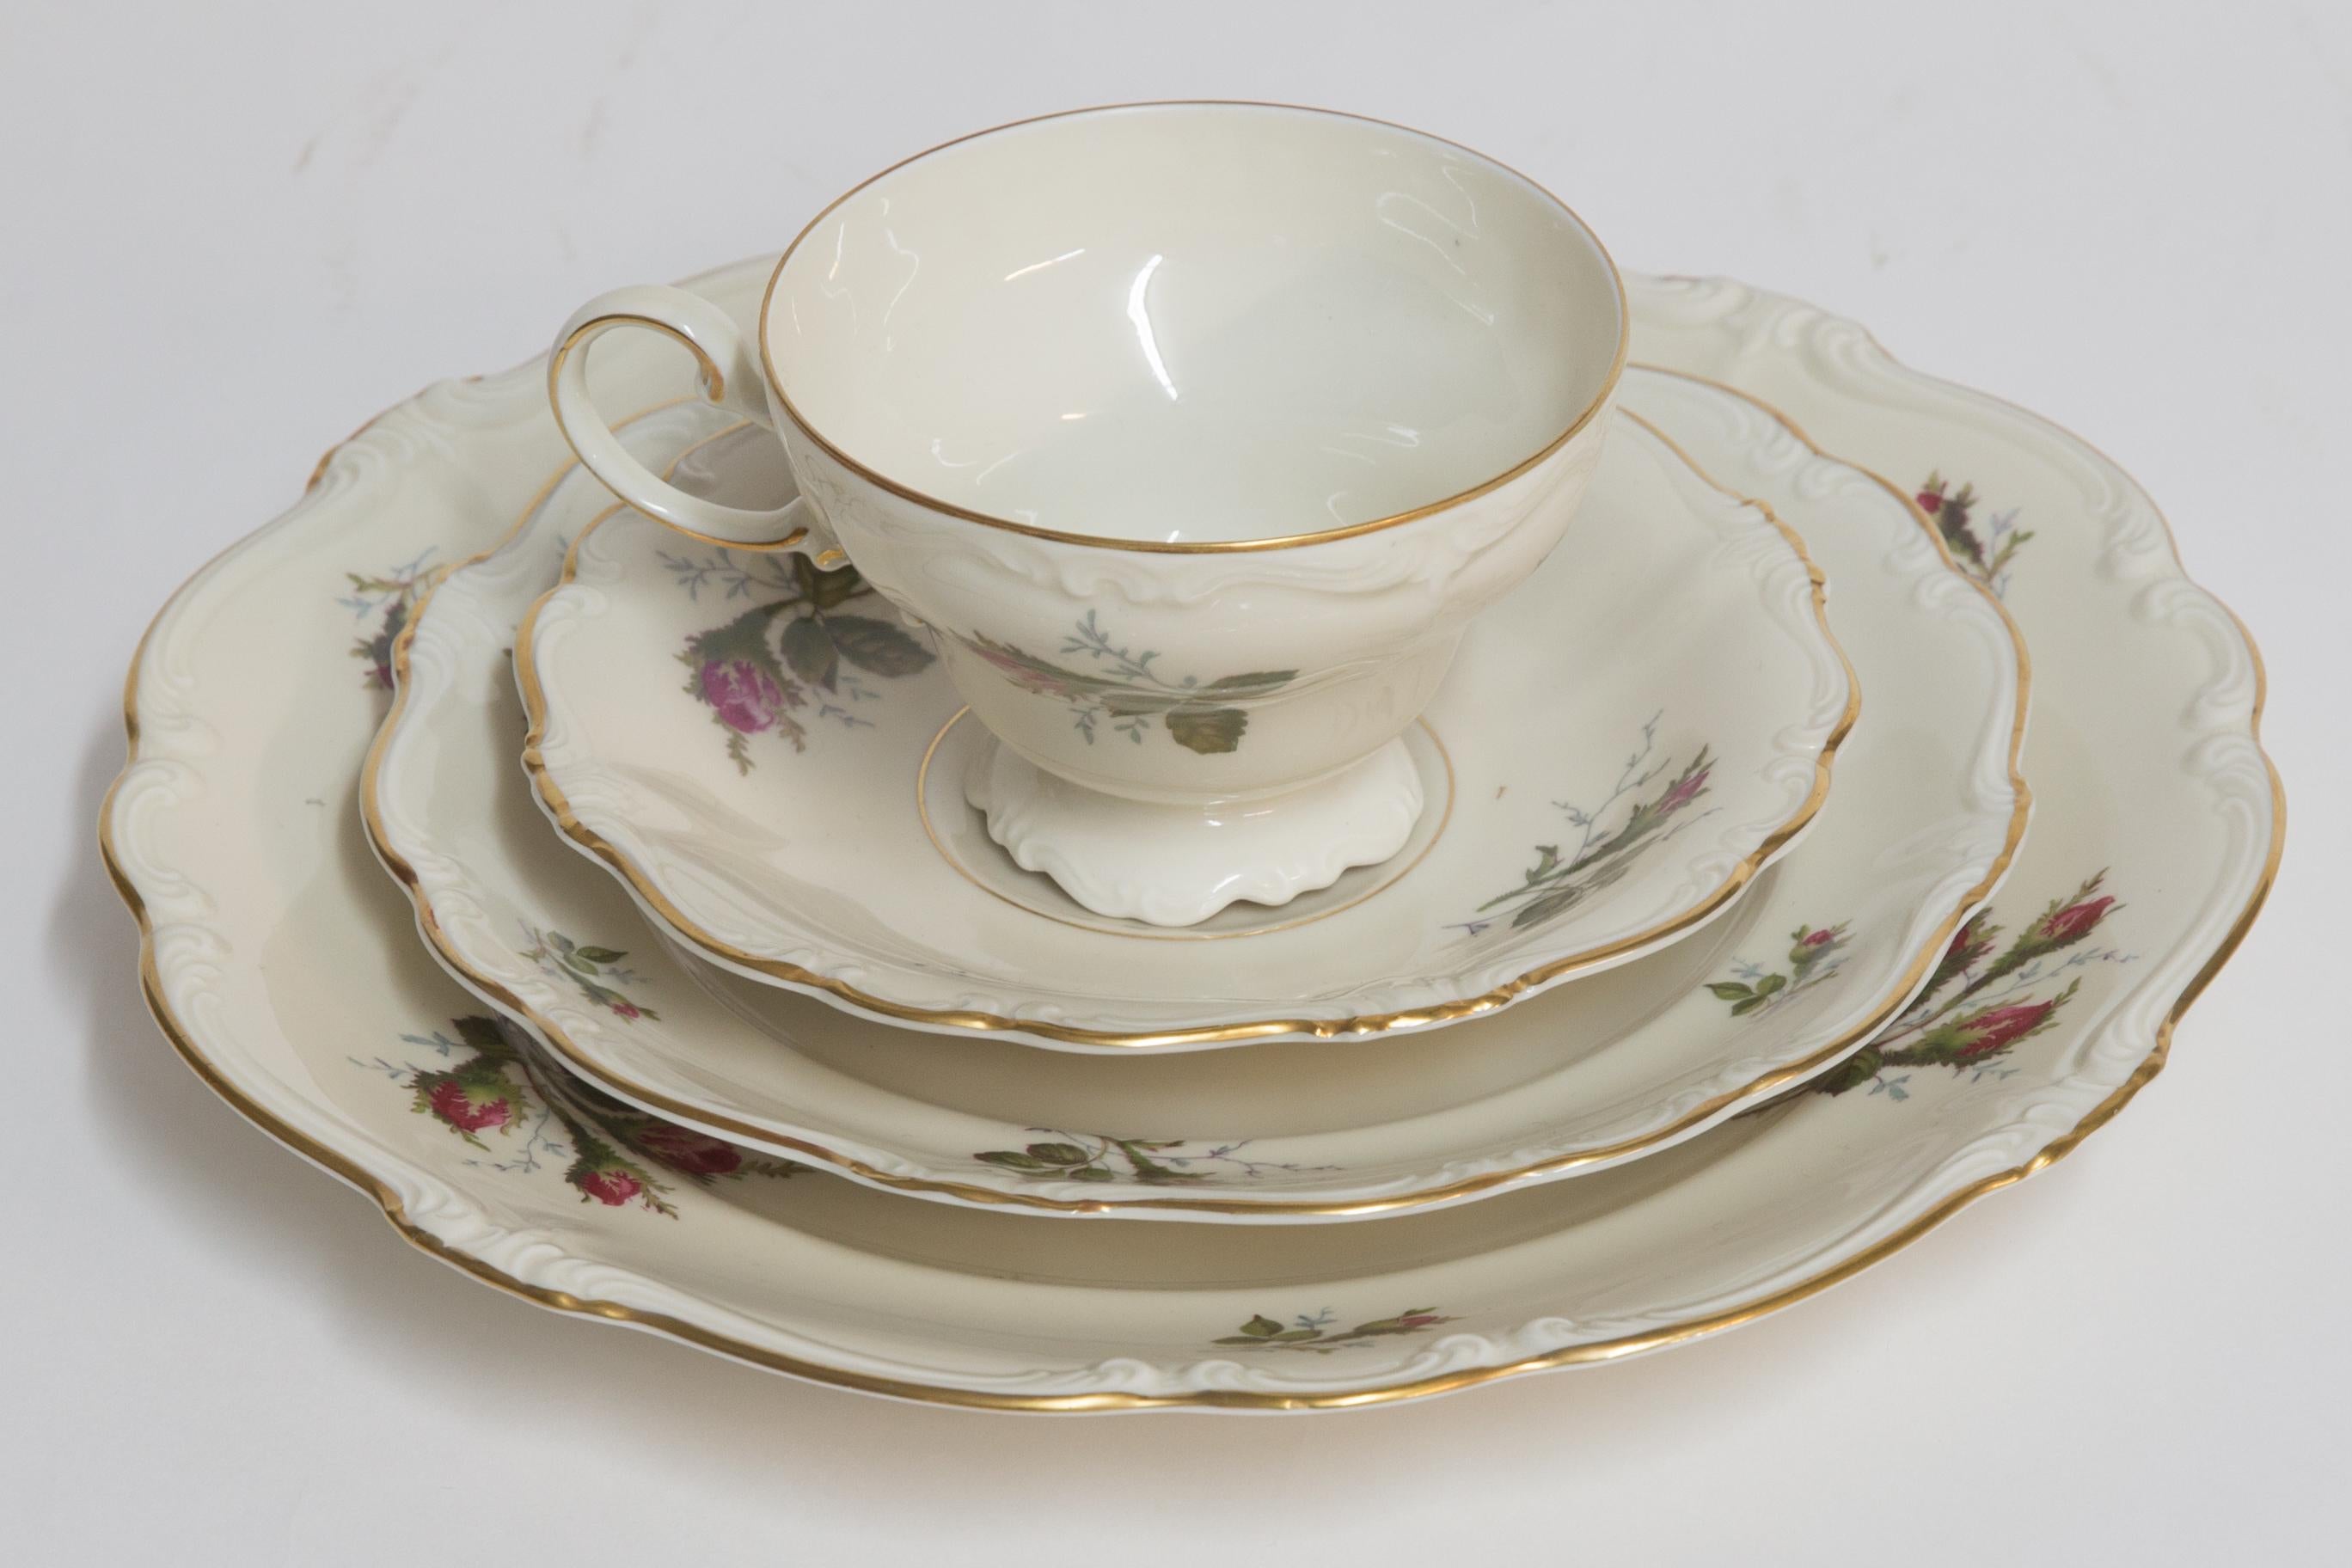 Offered is an extensive Rosenthal Pompadour pattern porcelain midcentury dinner service for 12 with a number of serving pieces approximately 110 pieces in good condition.